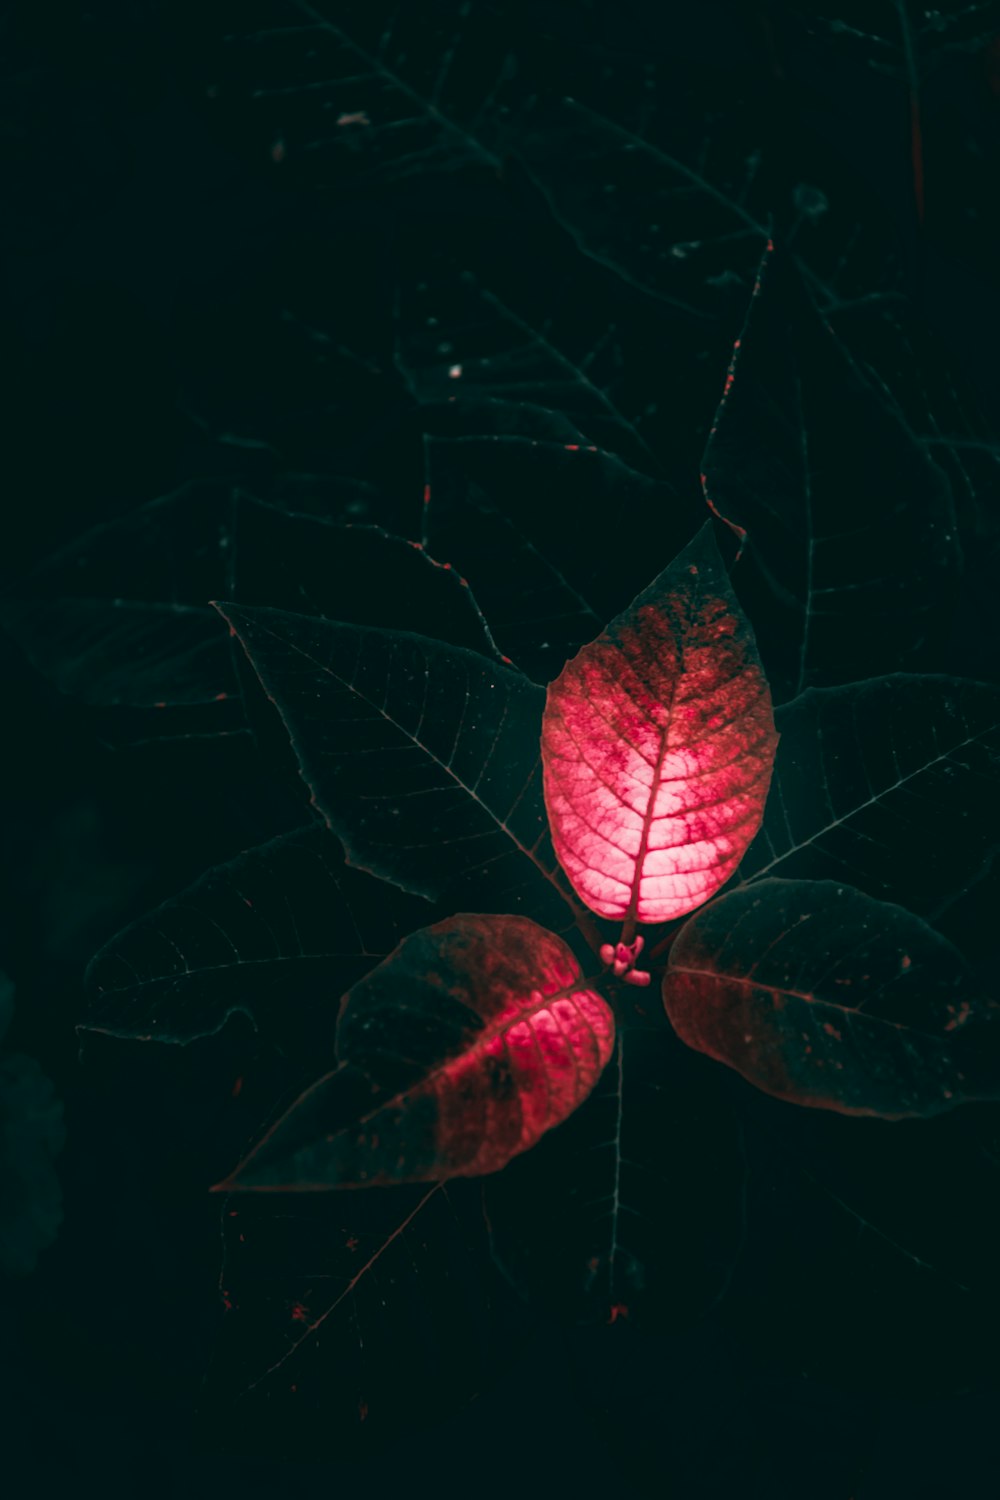 a close up of a red light on a leaf